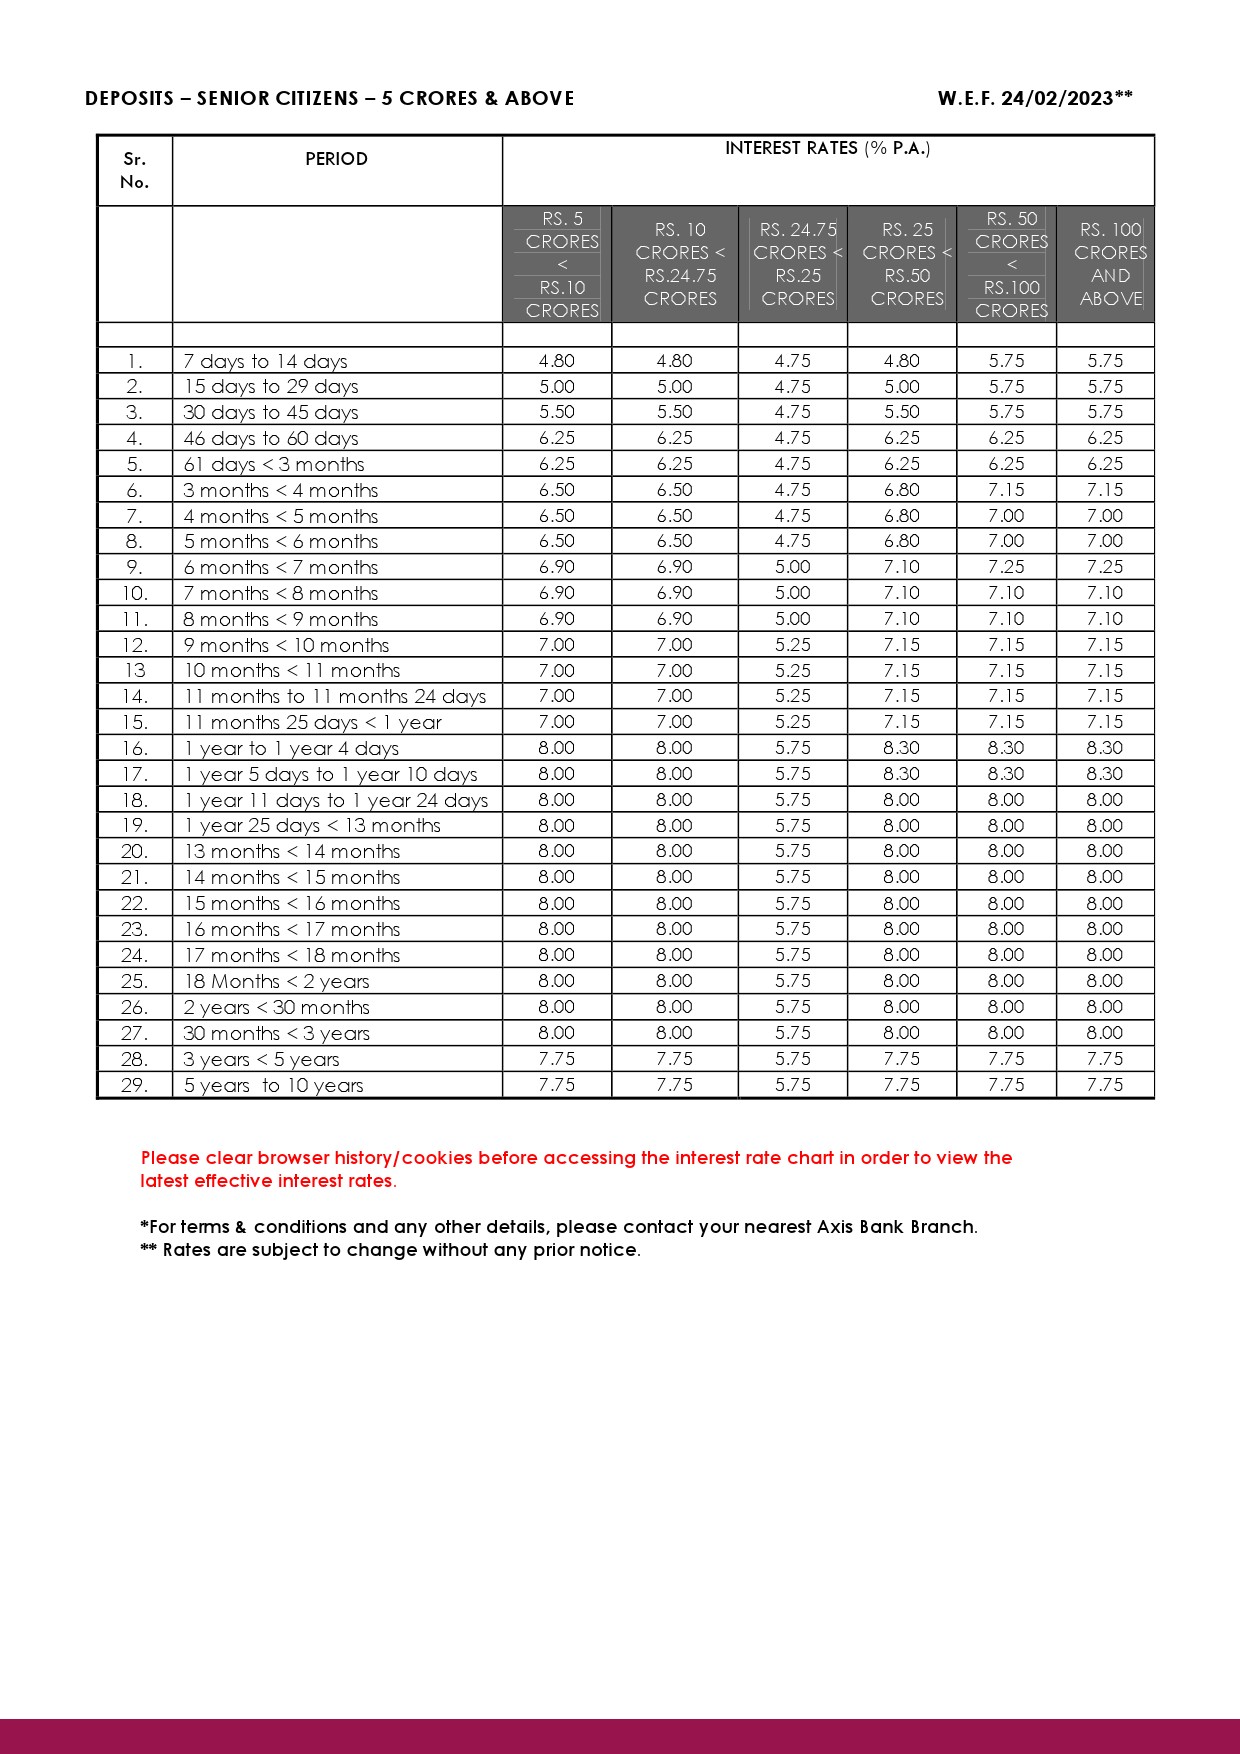 Fixed Deposit Interest Rates of Axis Bank Ltd - Image 4